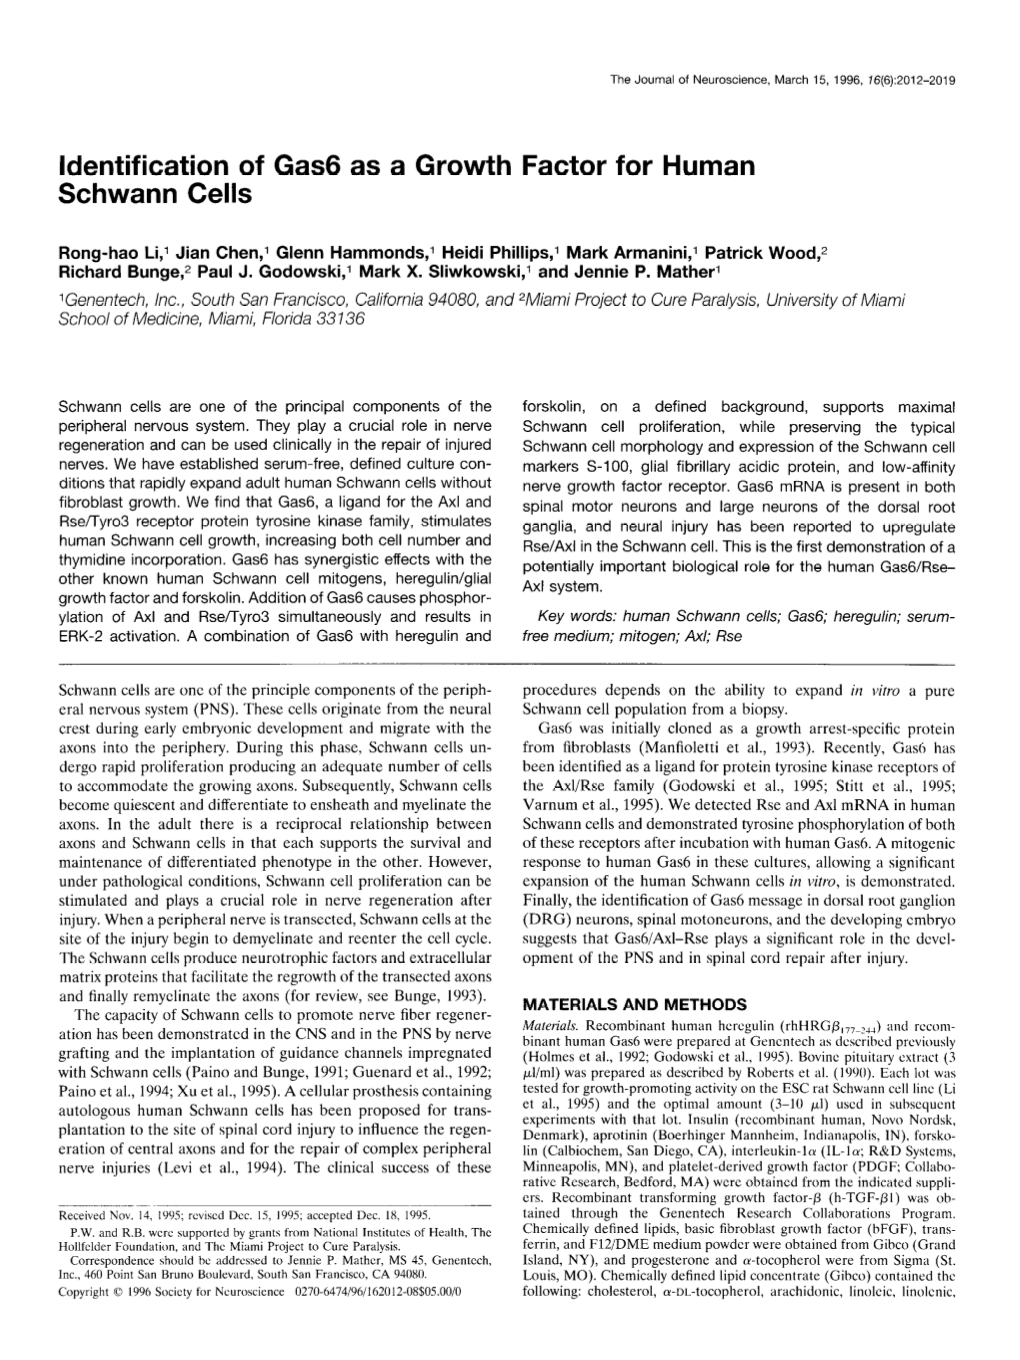 Identification of Gas6 As a Growth Factor for Human Schwann Cells